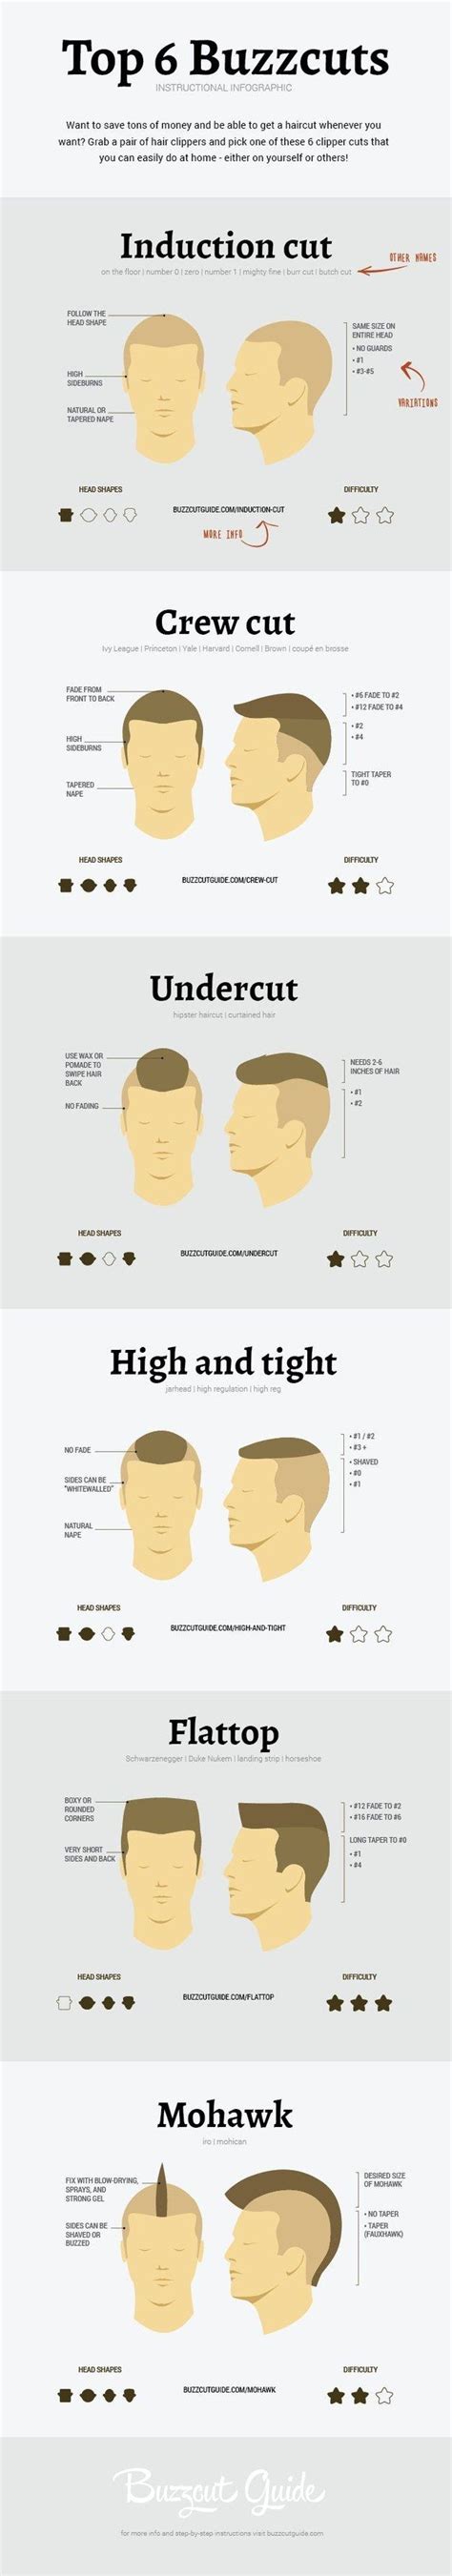 21 Grooming Charts Every Guy Needs To See Buzz Haircut Hair And Beard Styles Haircuts For Men